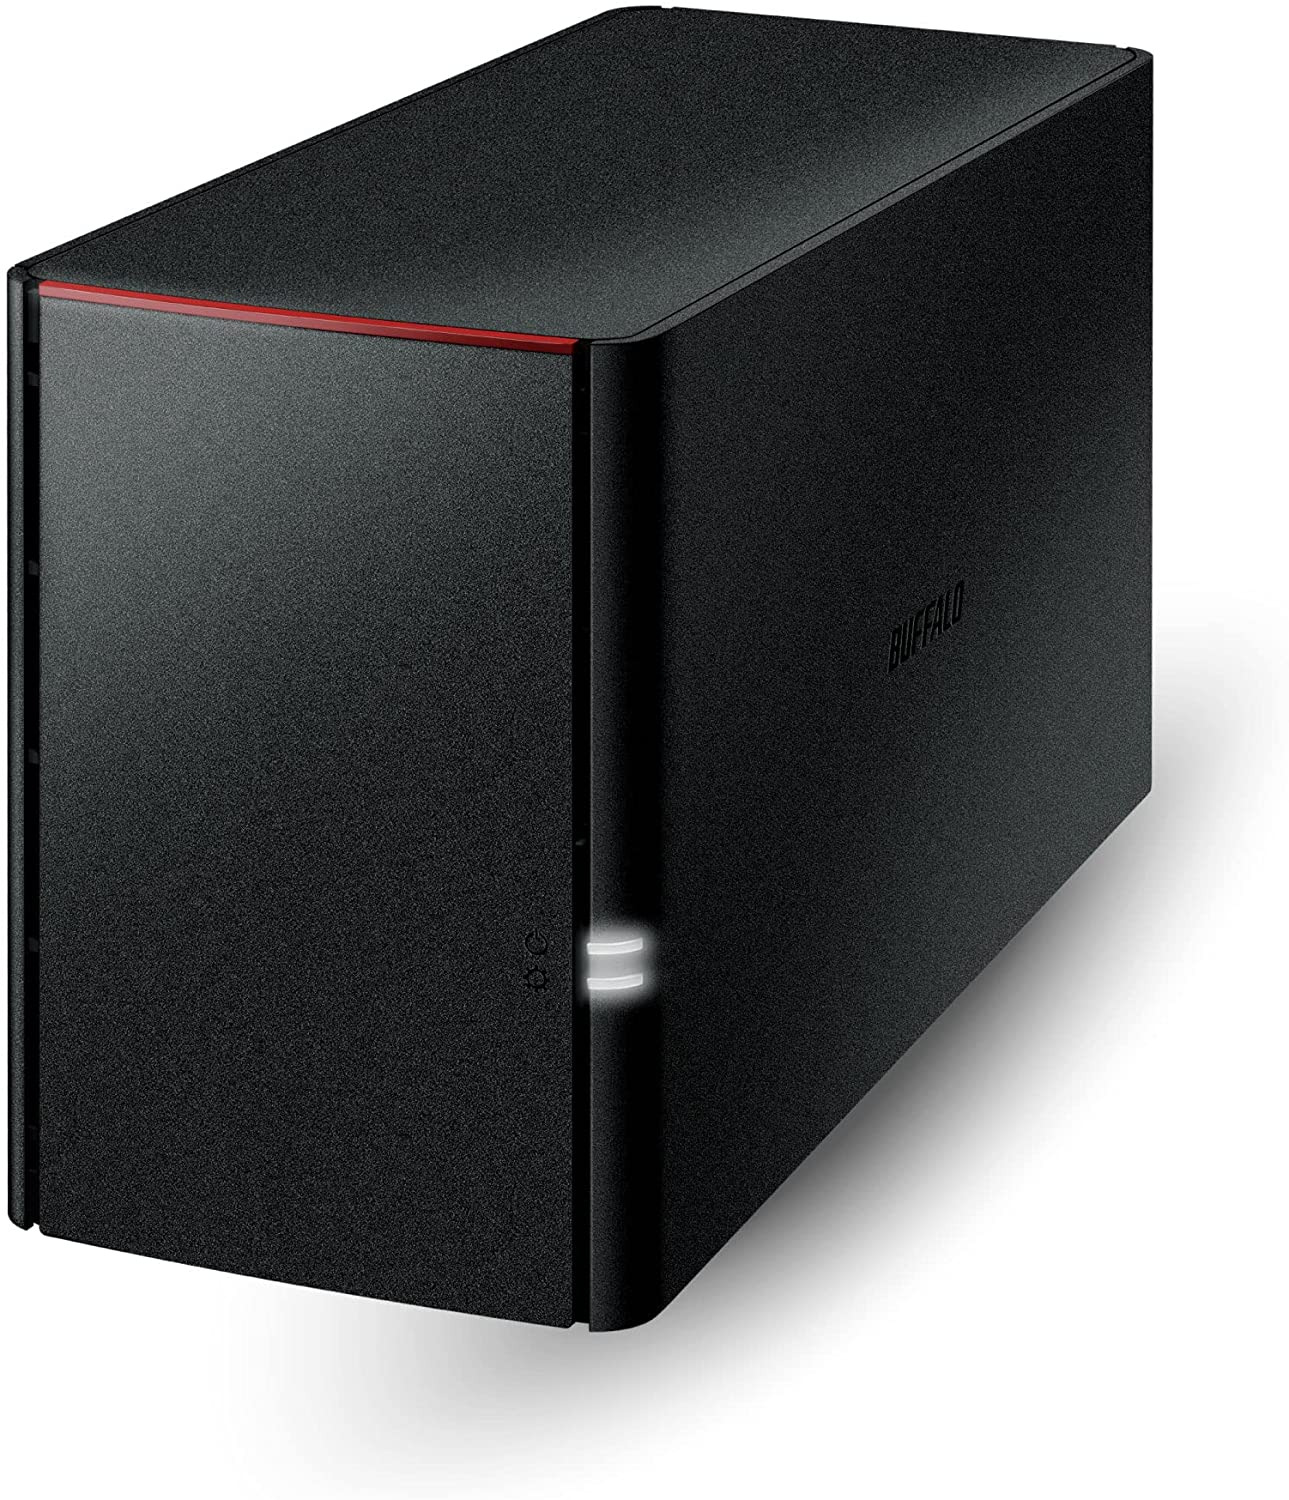 LinkStation SoHo 220 4TB 2-Bay NAS Network Attached Storage with HDD Hard Drives